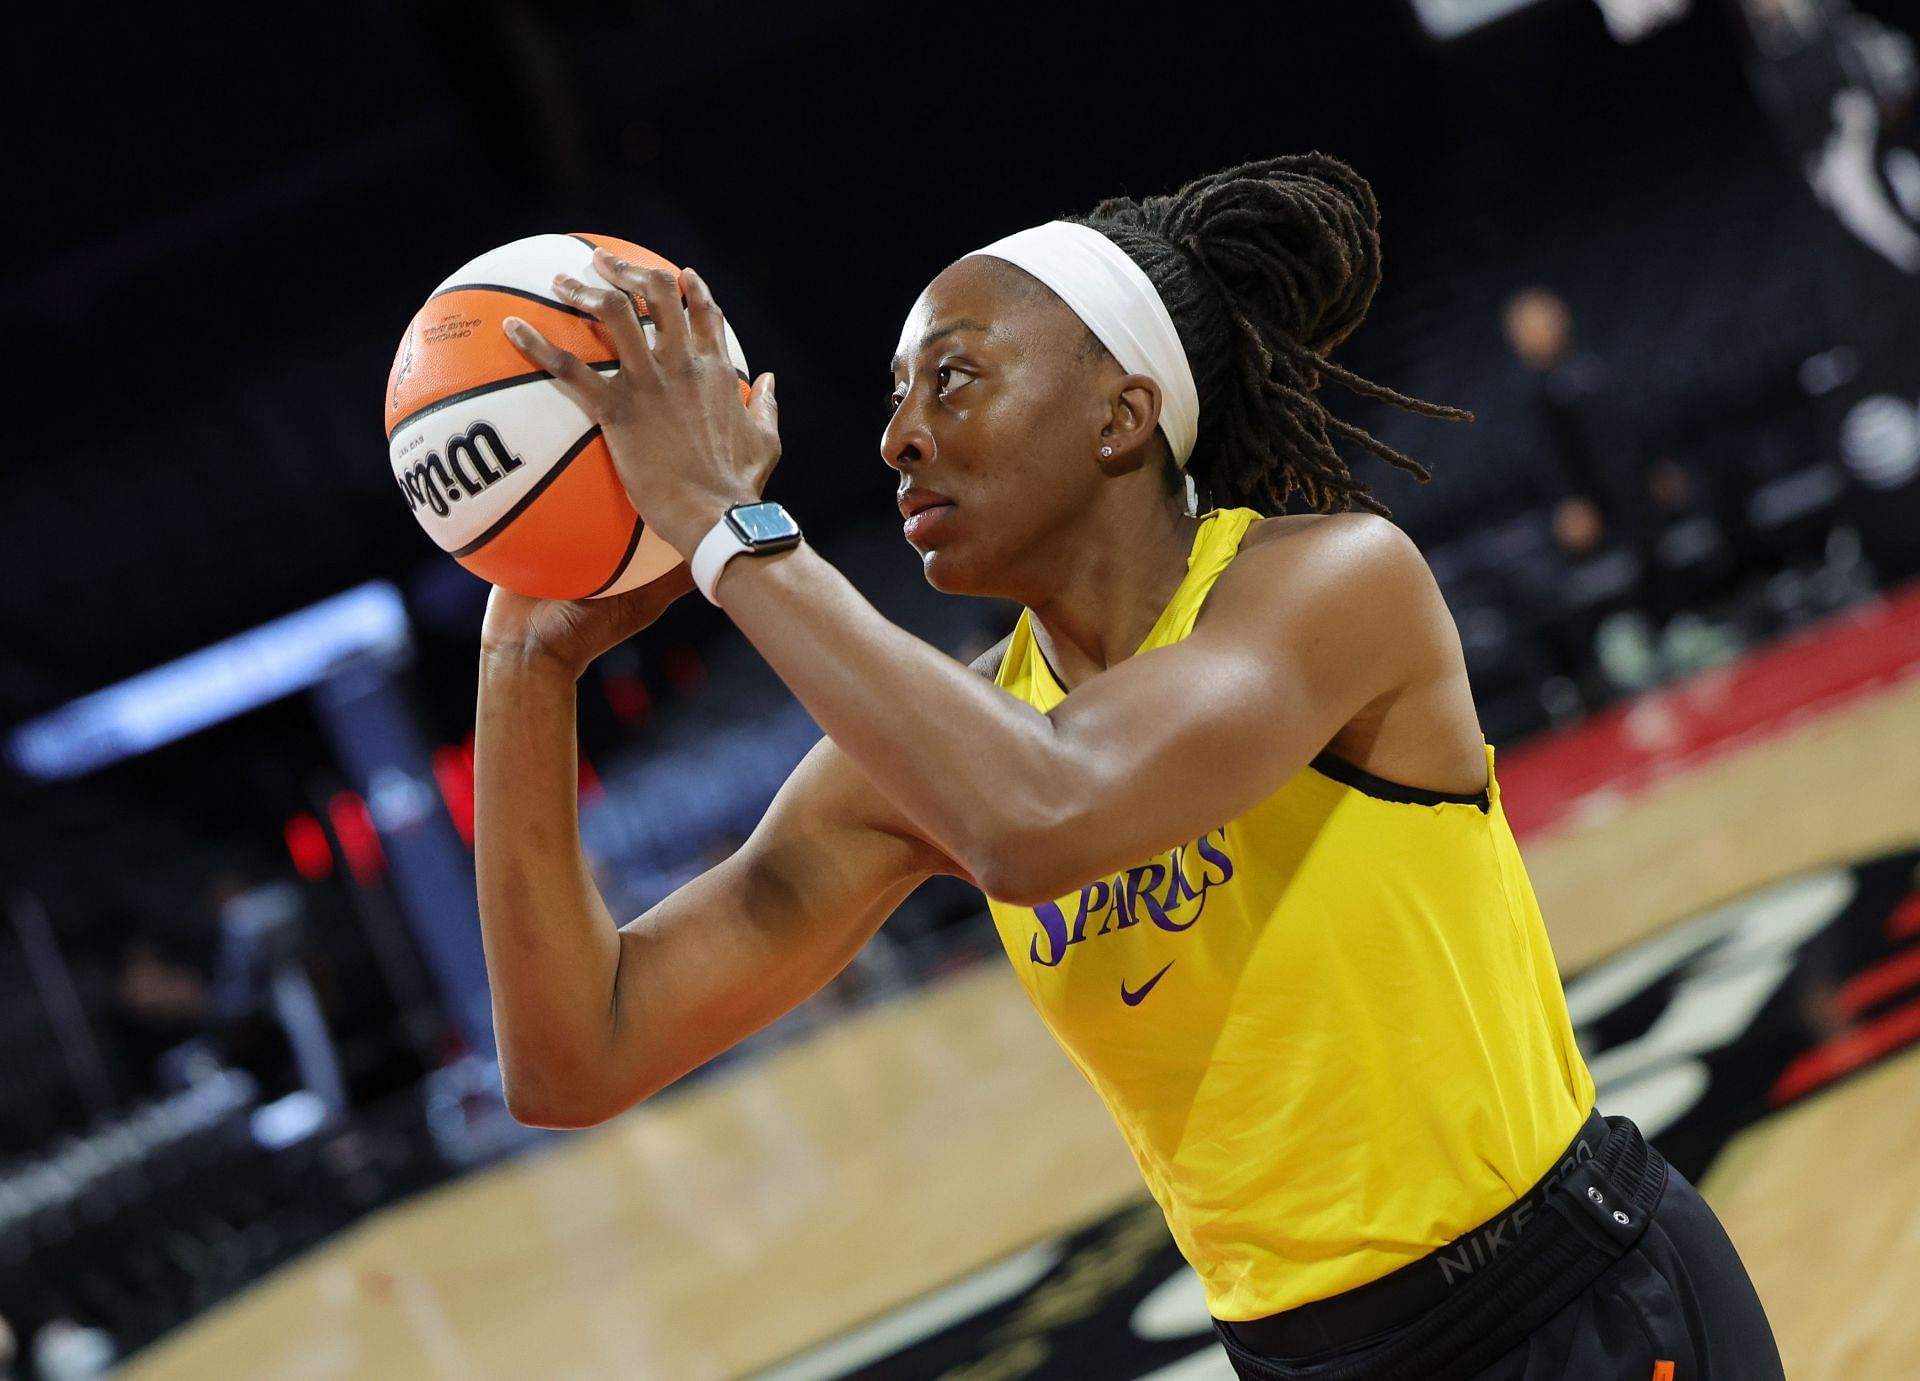 WNBA news: The Los Angeles Sparks are going big this season